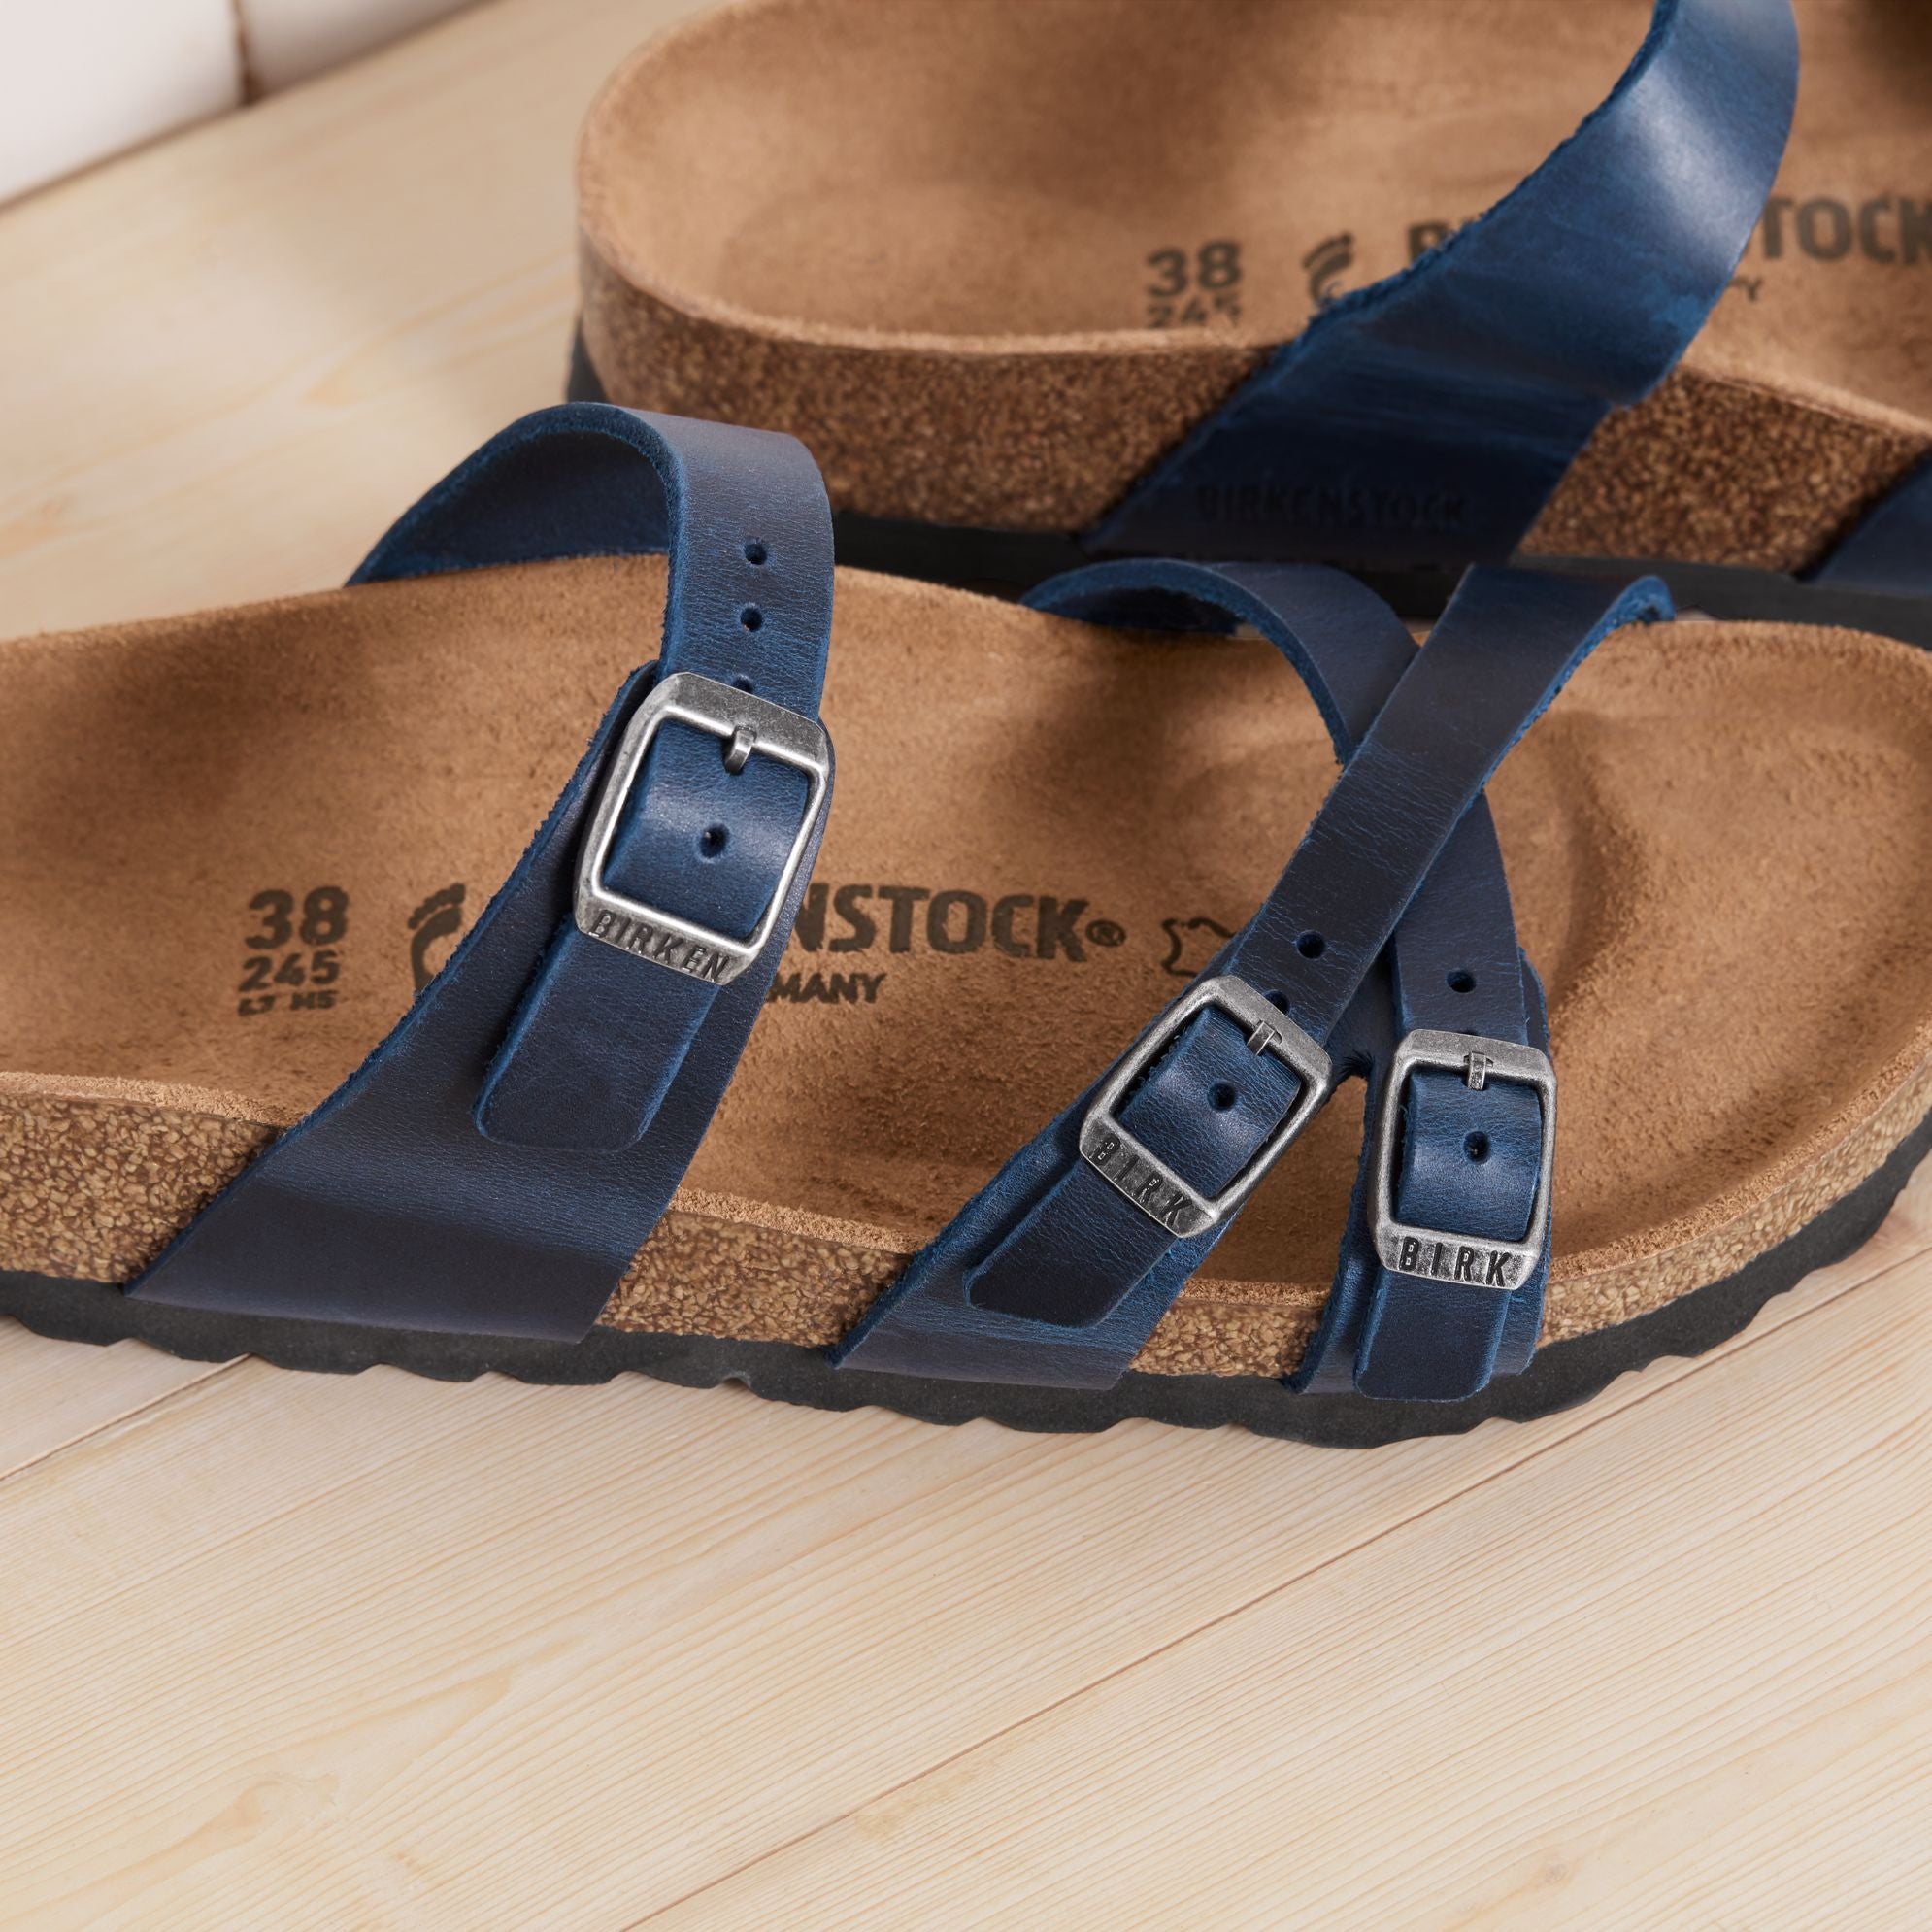 Birkenstock Limited Edition Franca blue oiled leather